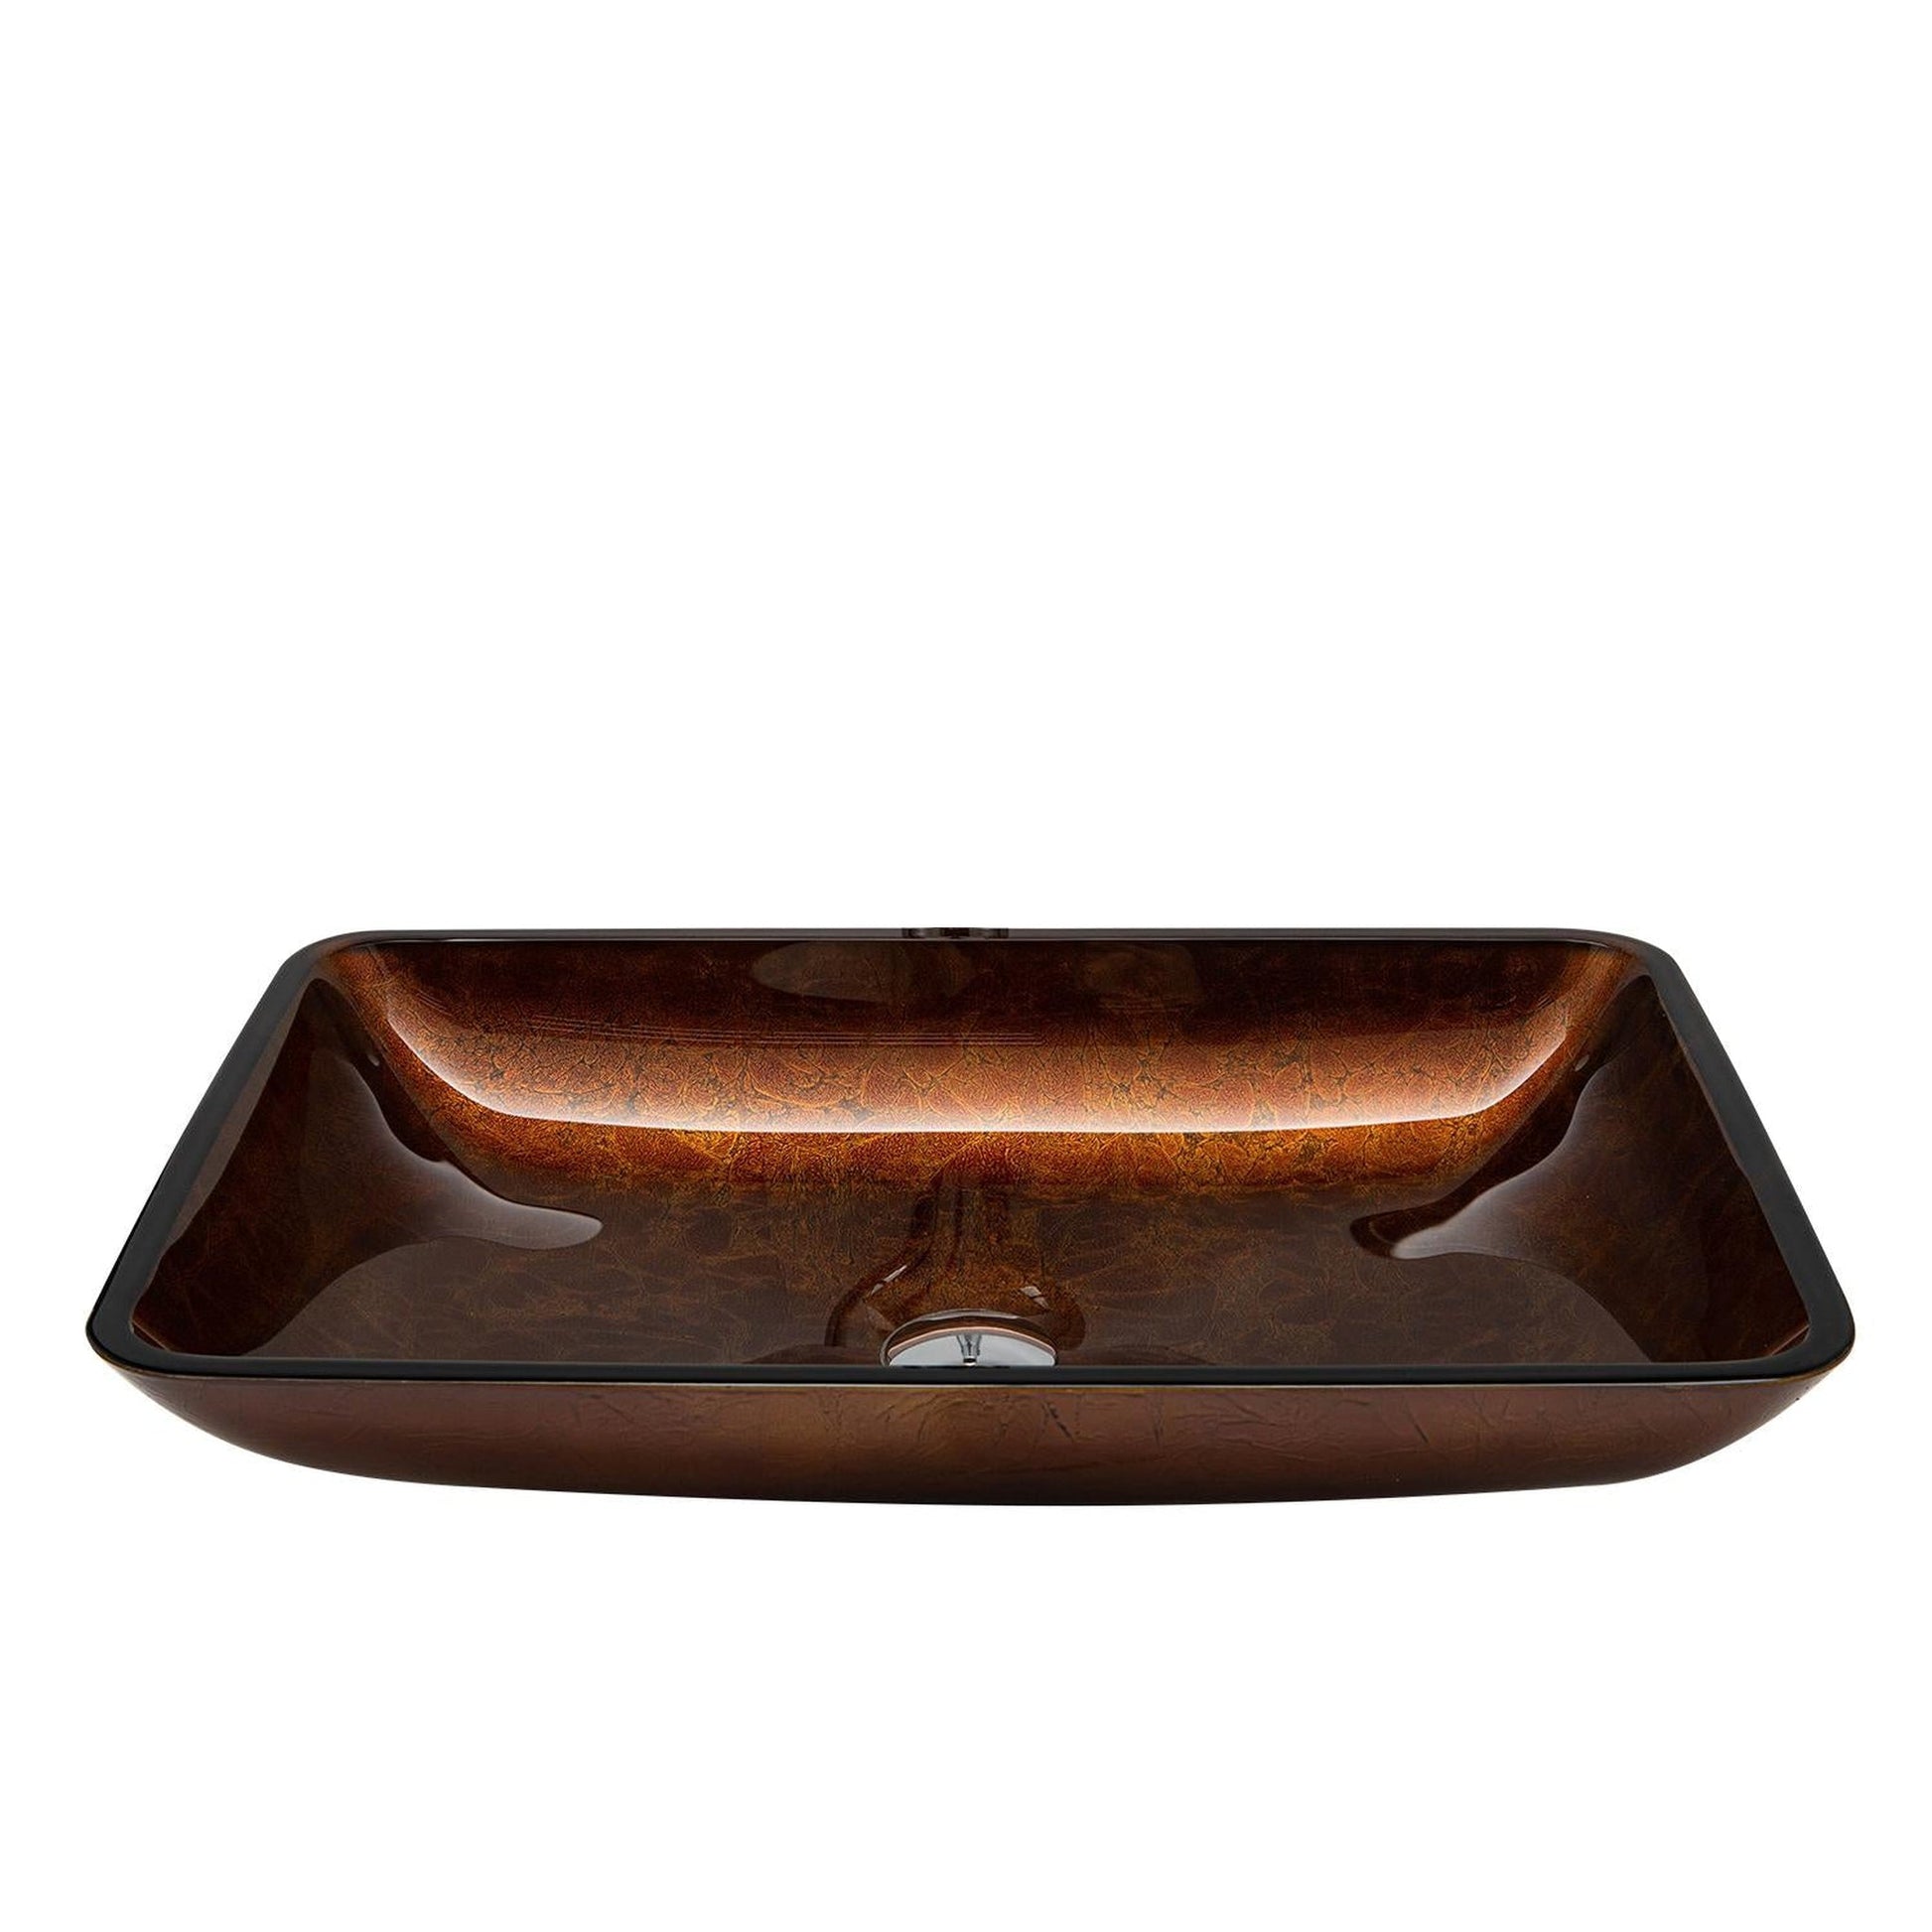 Vinnova Udine 22" Reddish Brown Rectangular Tempered Glass Painted by Hand Vessel Bathroom Sink Without Faucet